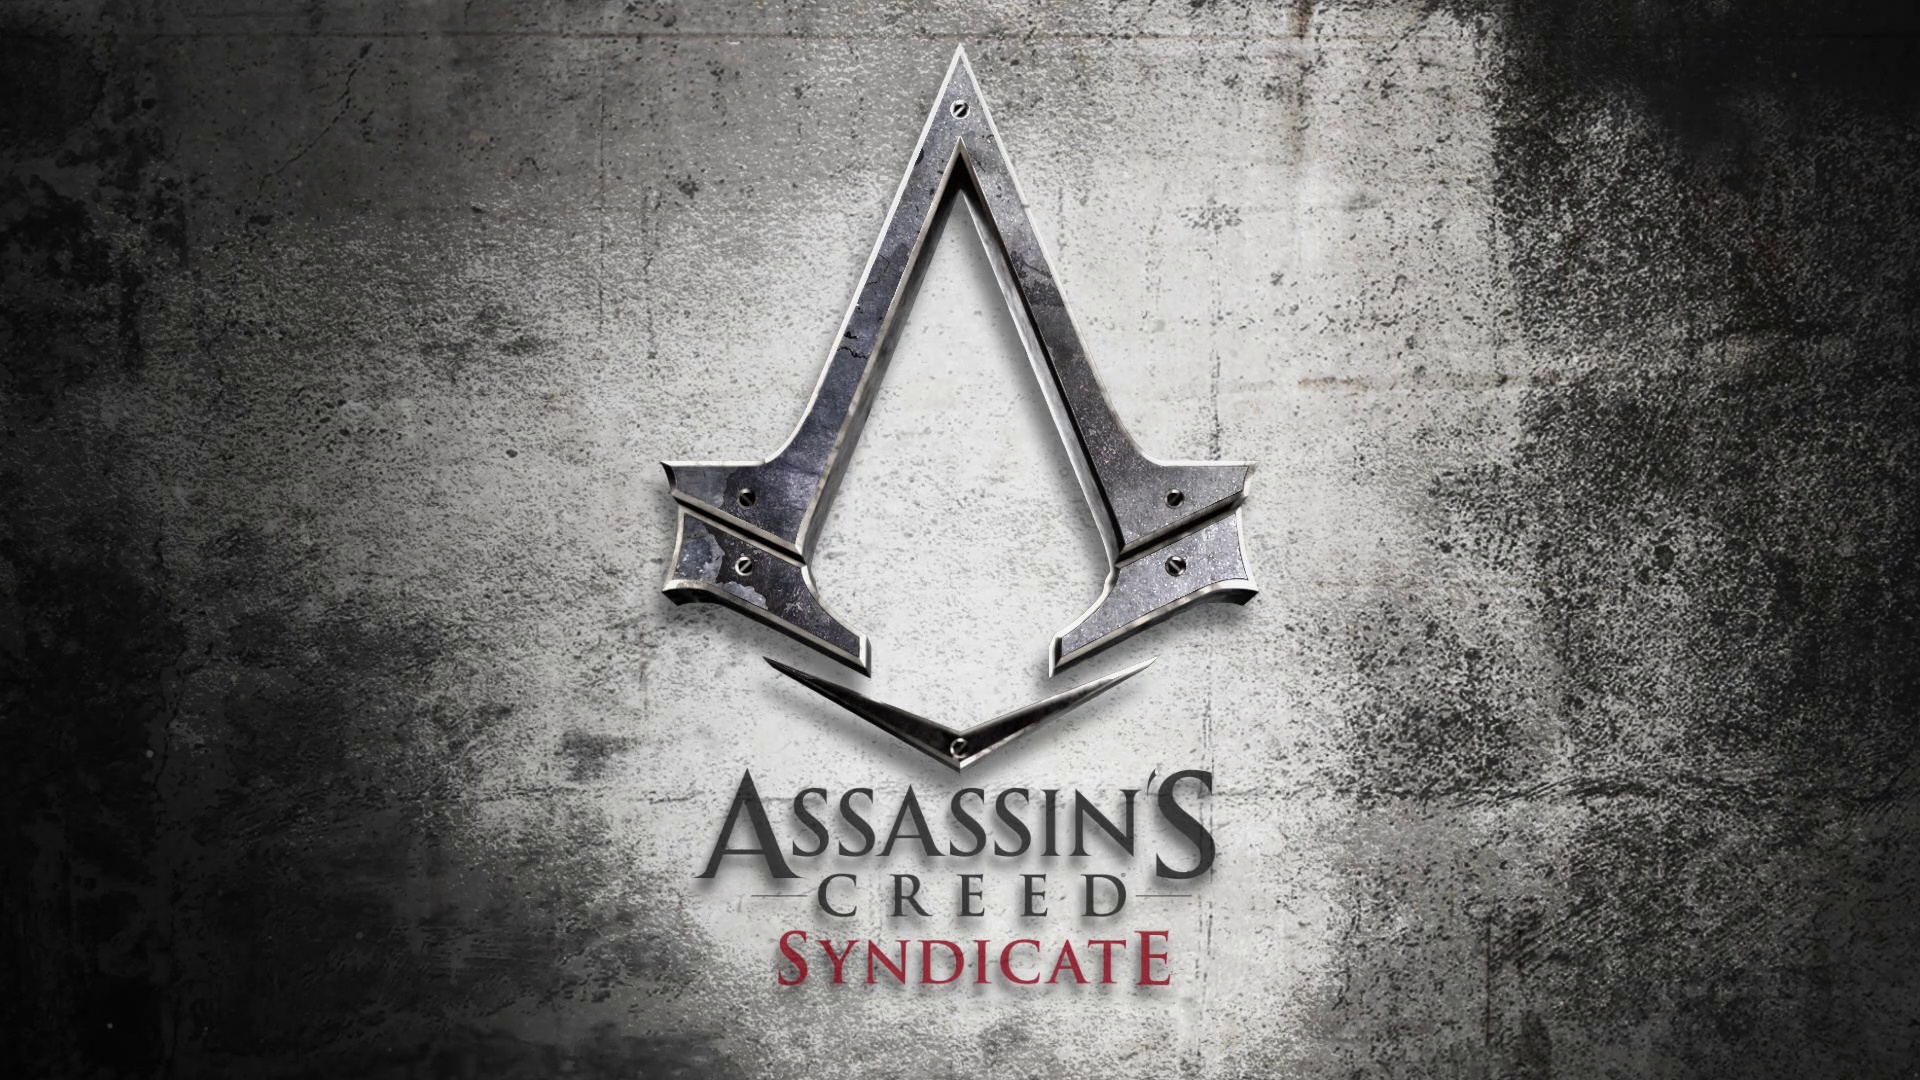 video game, assassin's creed: syndicate, logo, assassin's creed download HD wallpaper